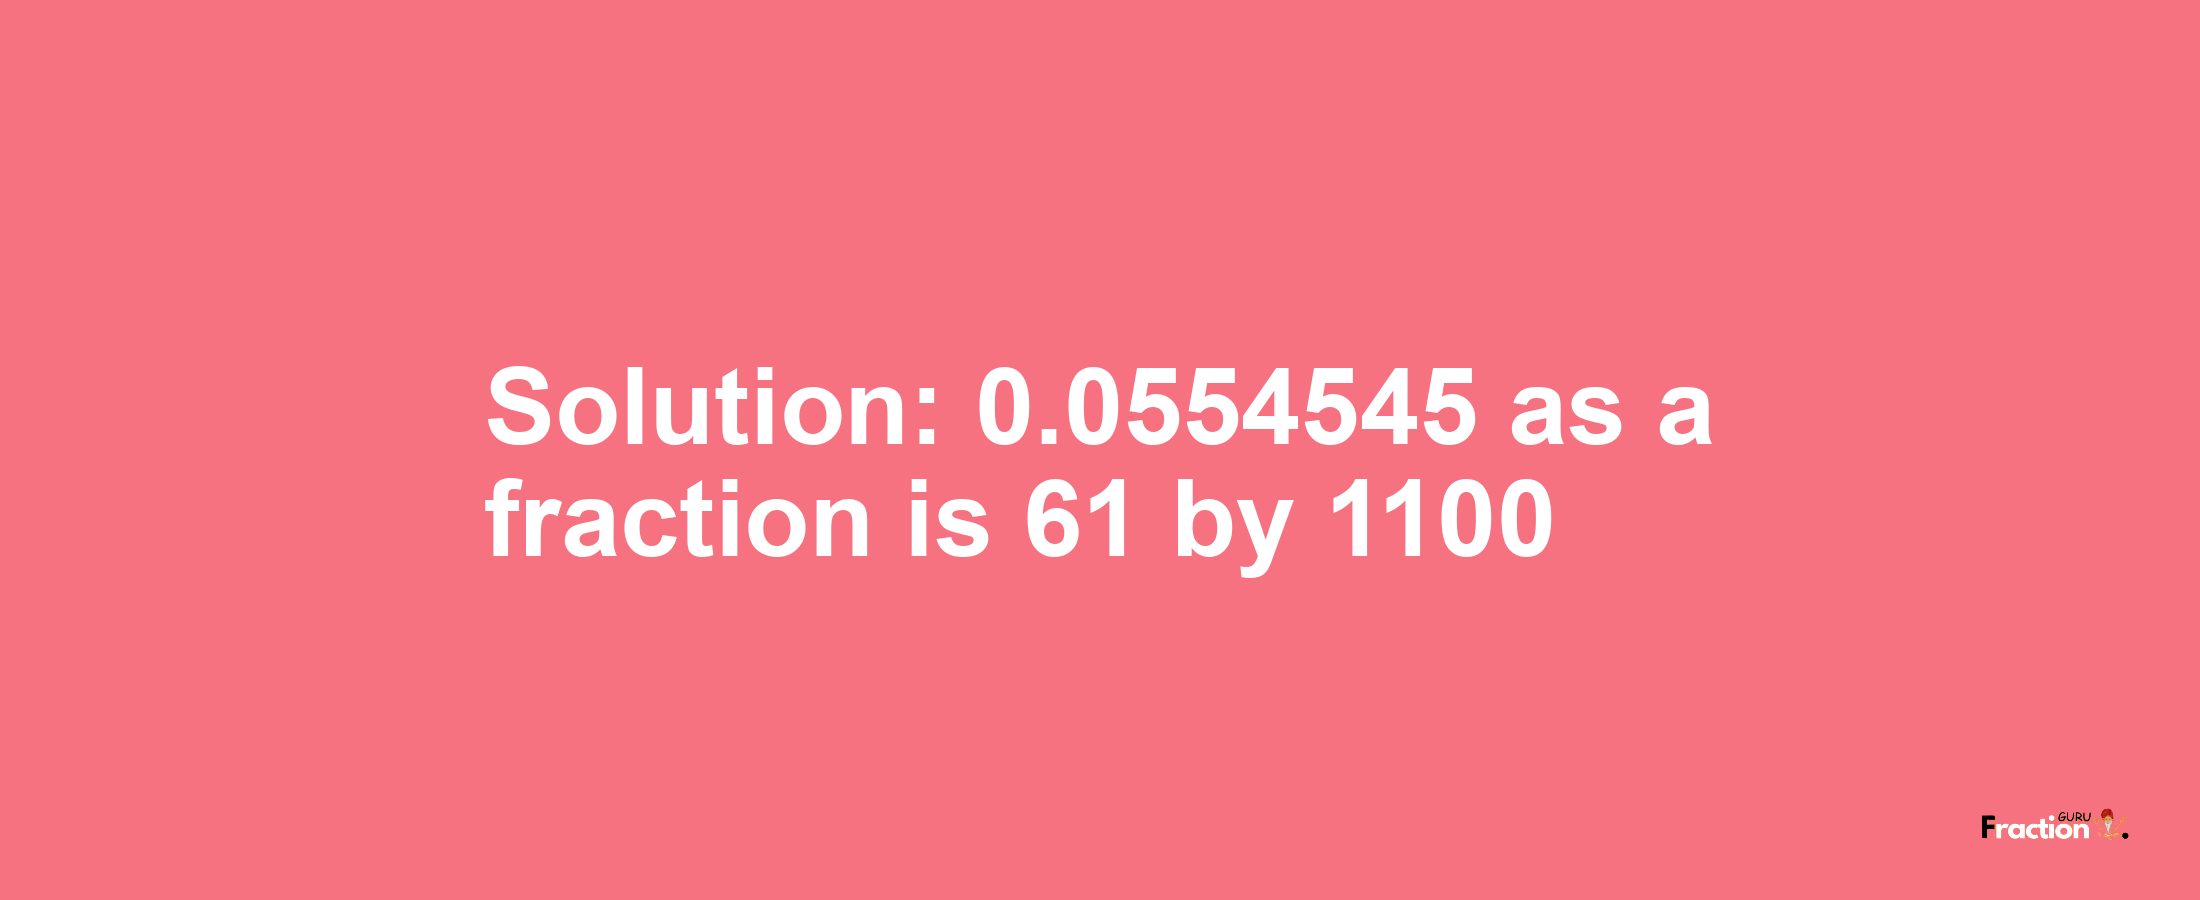 Solution:0.0554545 as a fraction is 61/1100